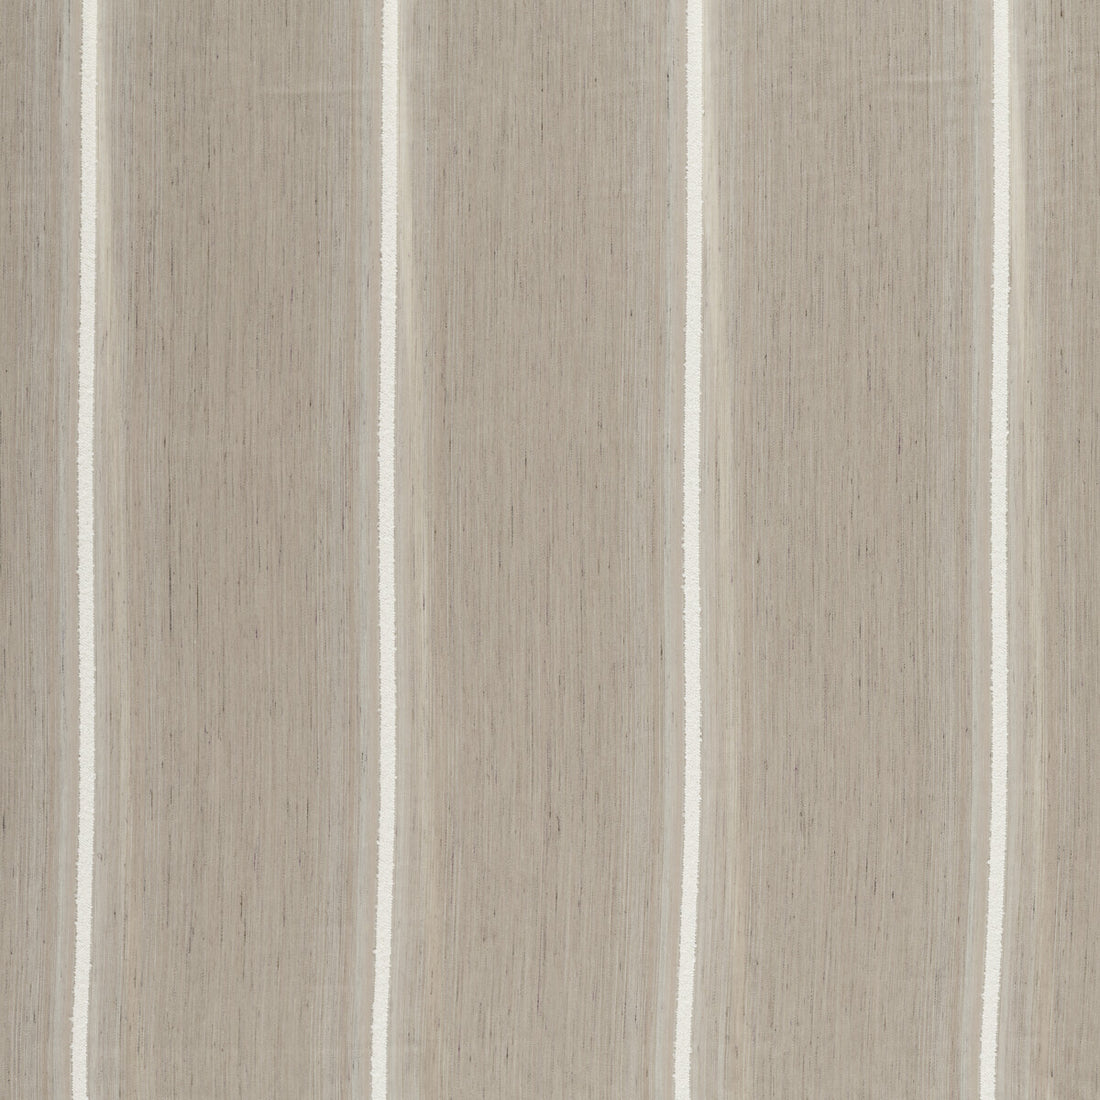 Jonas fabric in mocha color - pattern F1625/03.CAC.0 - by Clarke And Clarke in the Clarke And Clarke Vardo Sheers collection